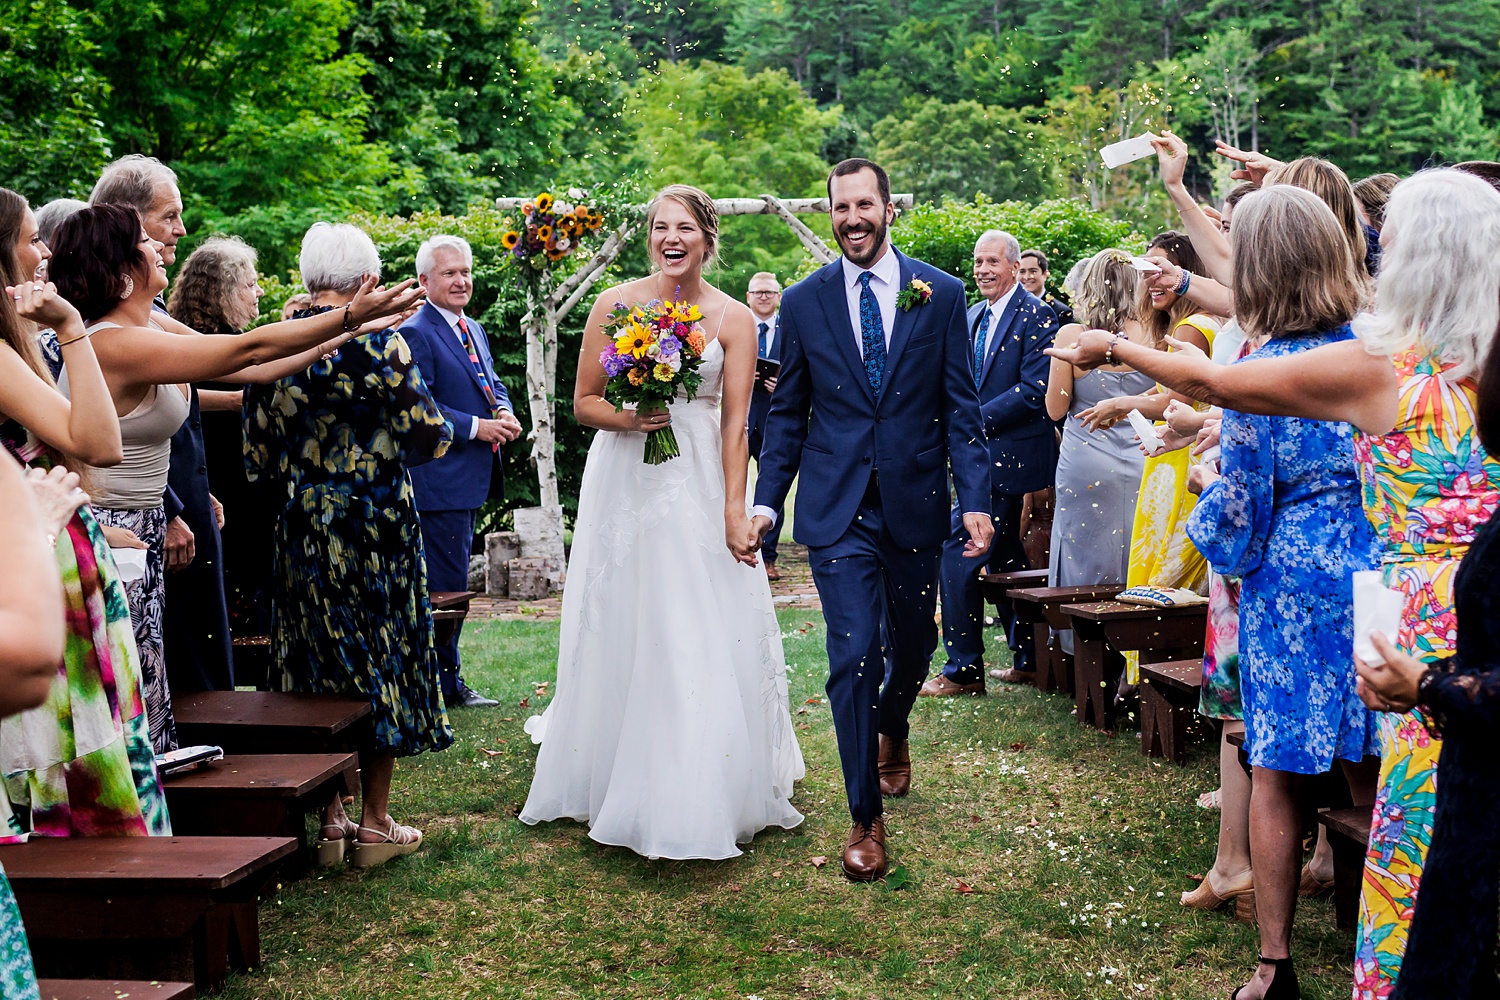 Walking back up the aisle during a petal toss on the wedding day at The Preserve at Chocorua in Tamworth NH